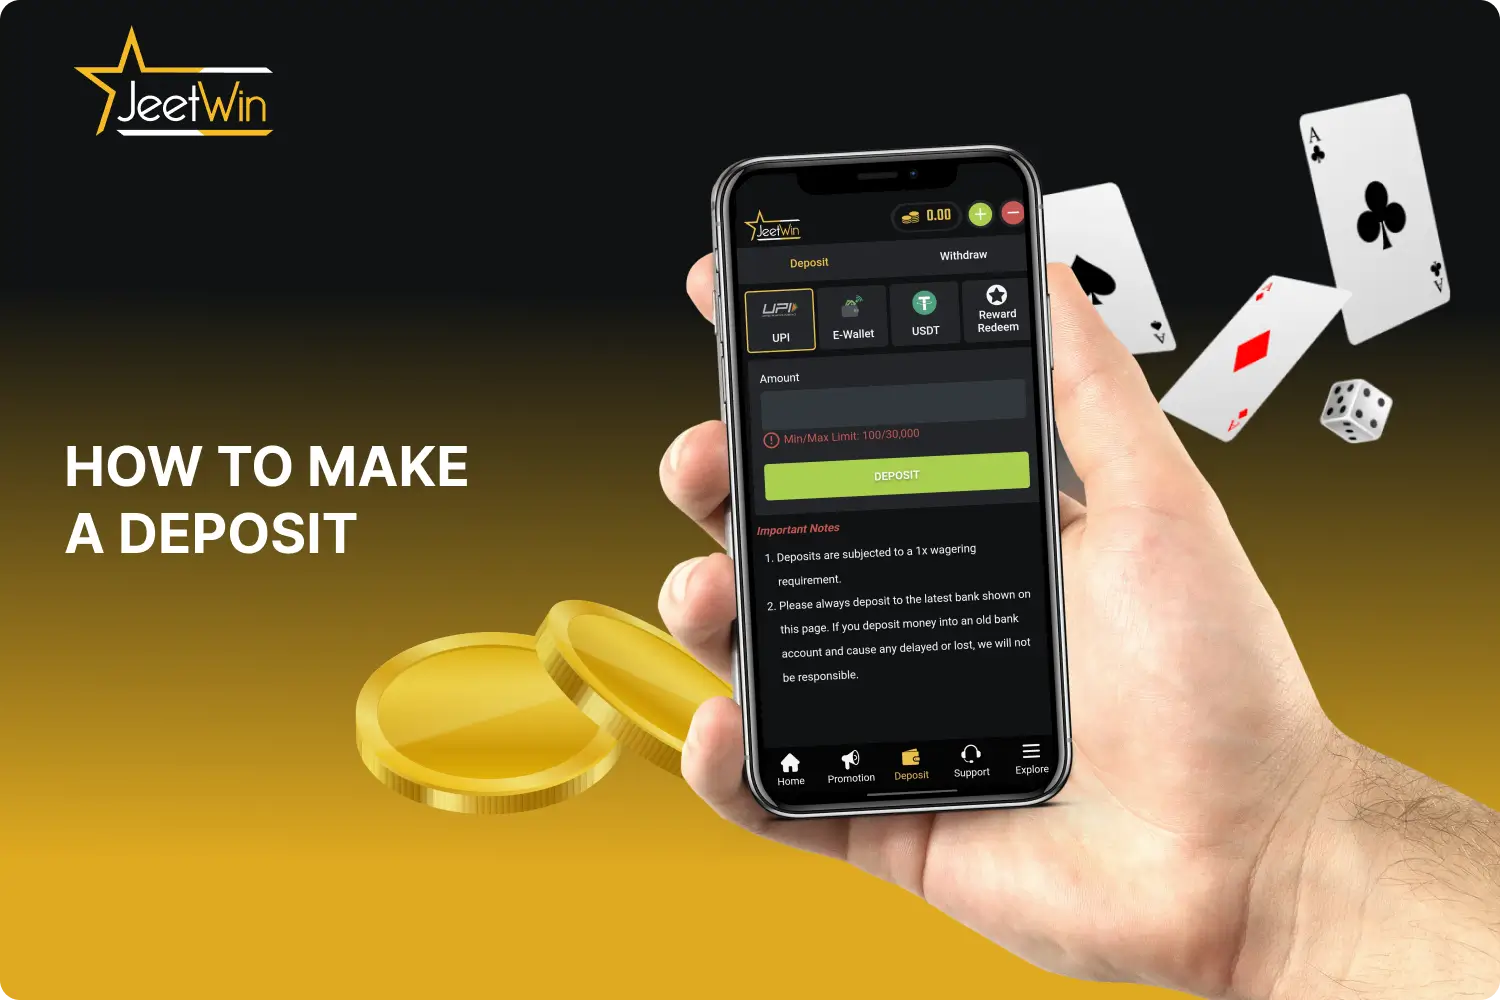 To make a deposit on Jeetwin you need to follow a few simple steps